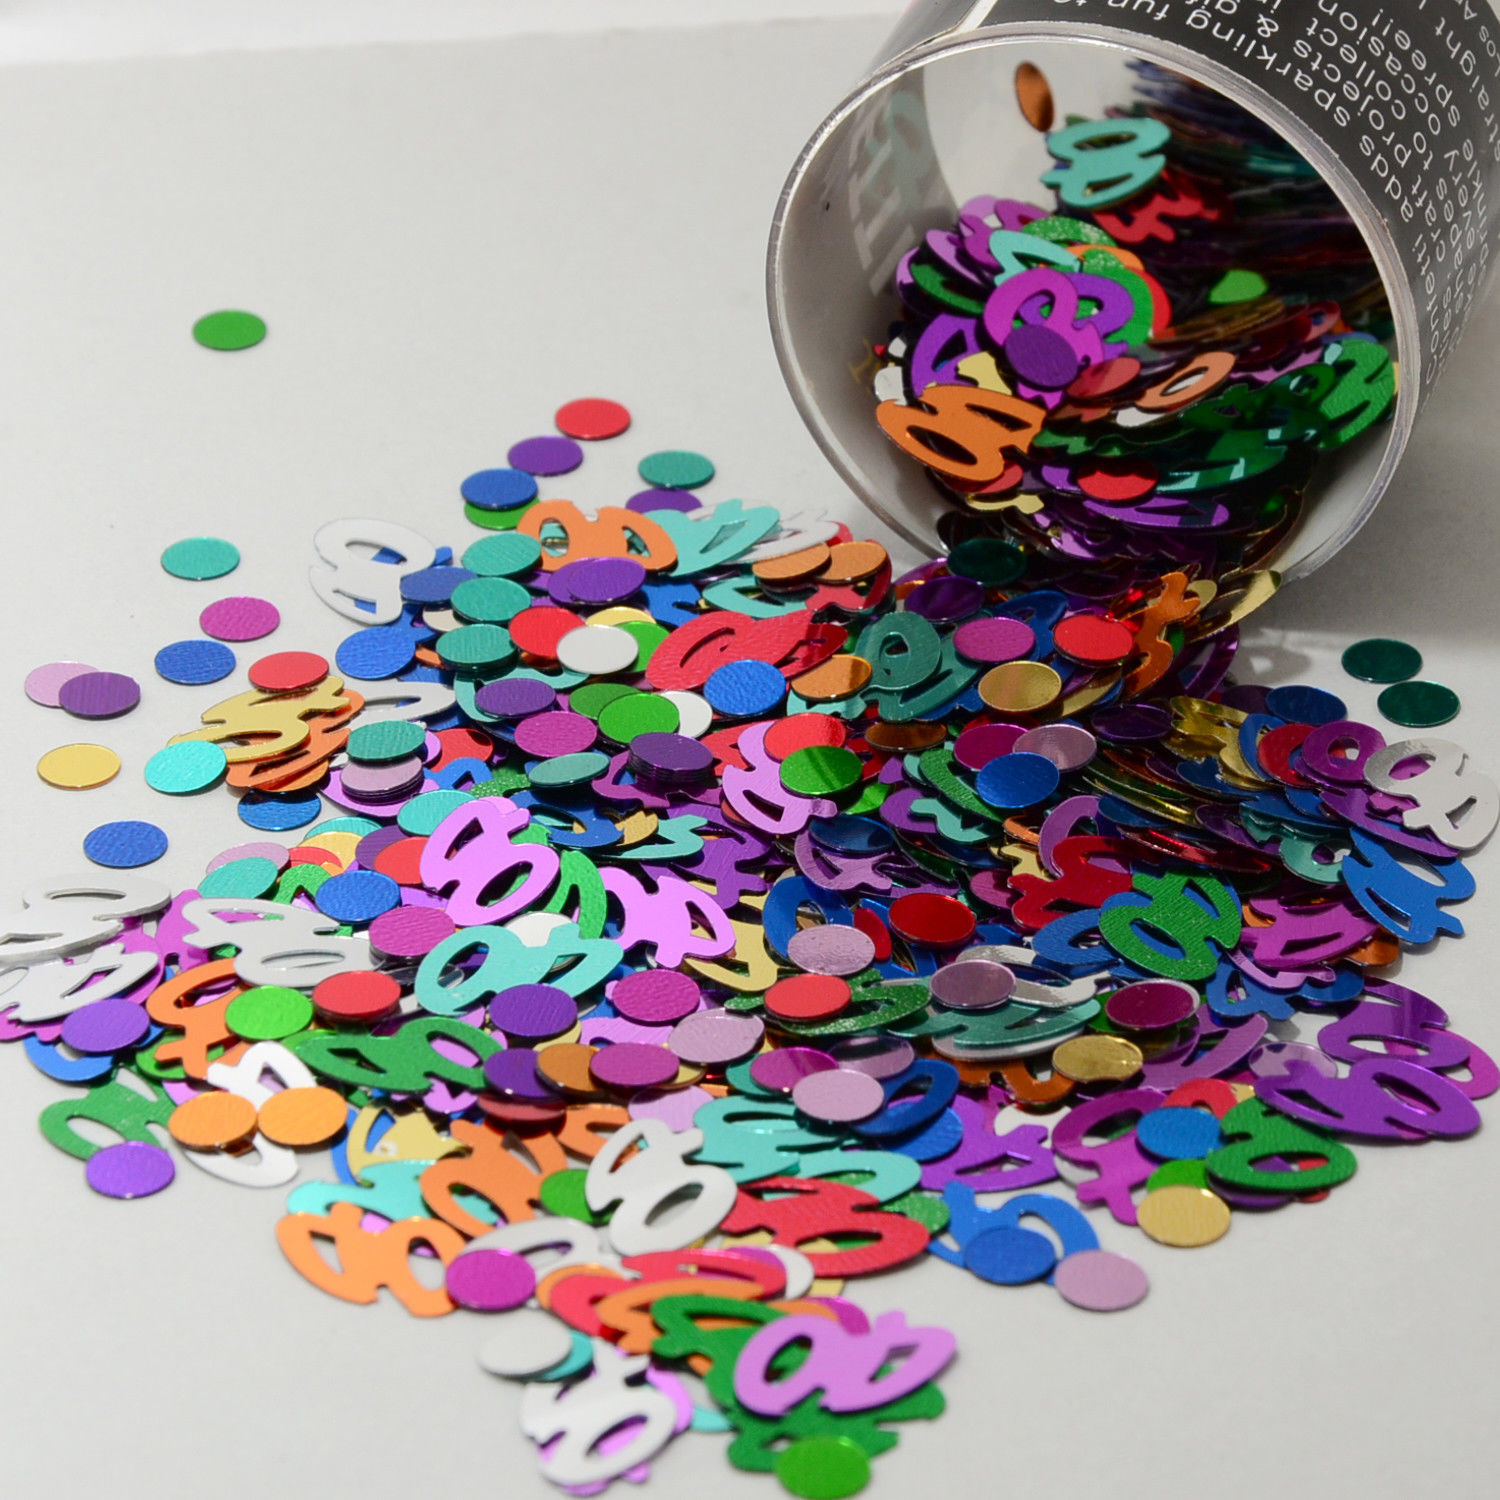 Number 40 and Circles Multicolor Confetti Bag 1/2 Oz Birthday Party CCP9003 - $3.95 - $28.70